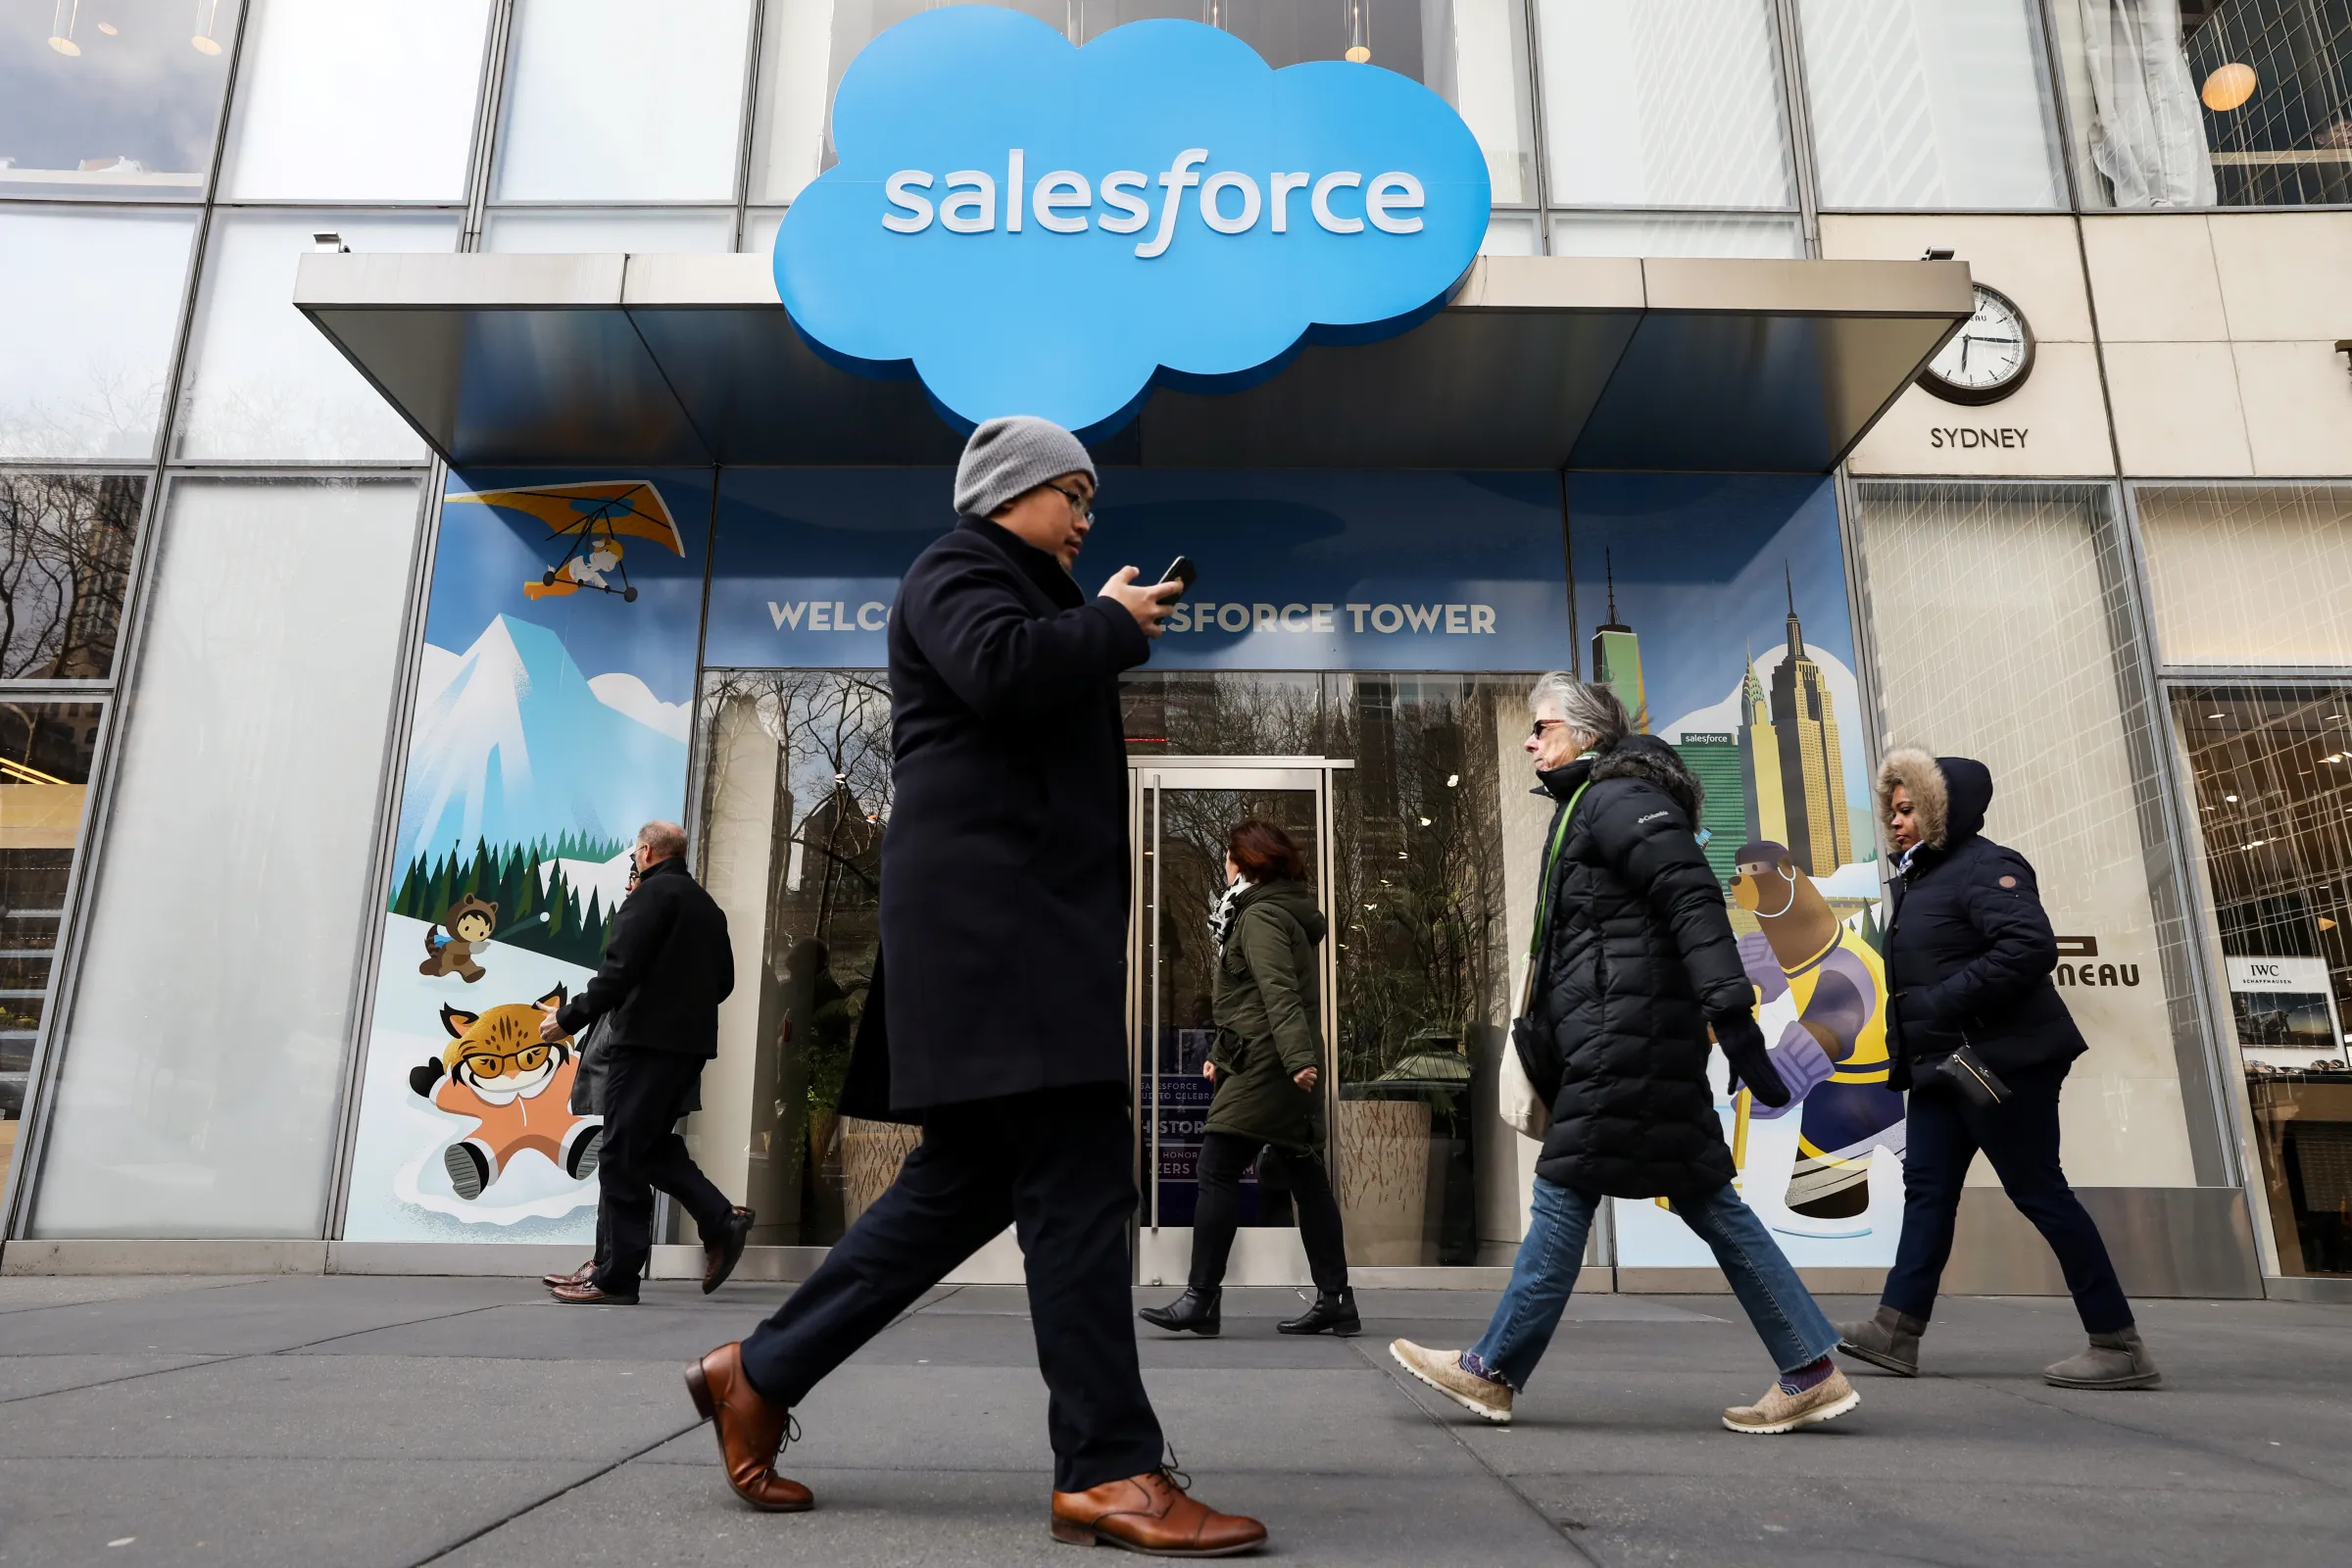 People pass by the Salesforce Tower and Salesforce.com offices in New York City, U.S., March 7, 2019. REUTERS/Brendan McDermid